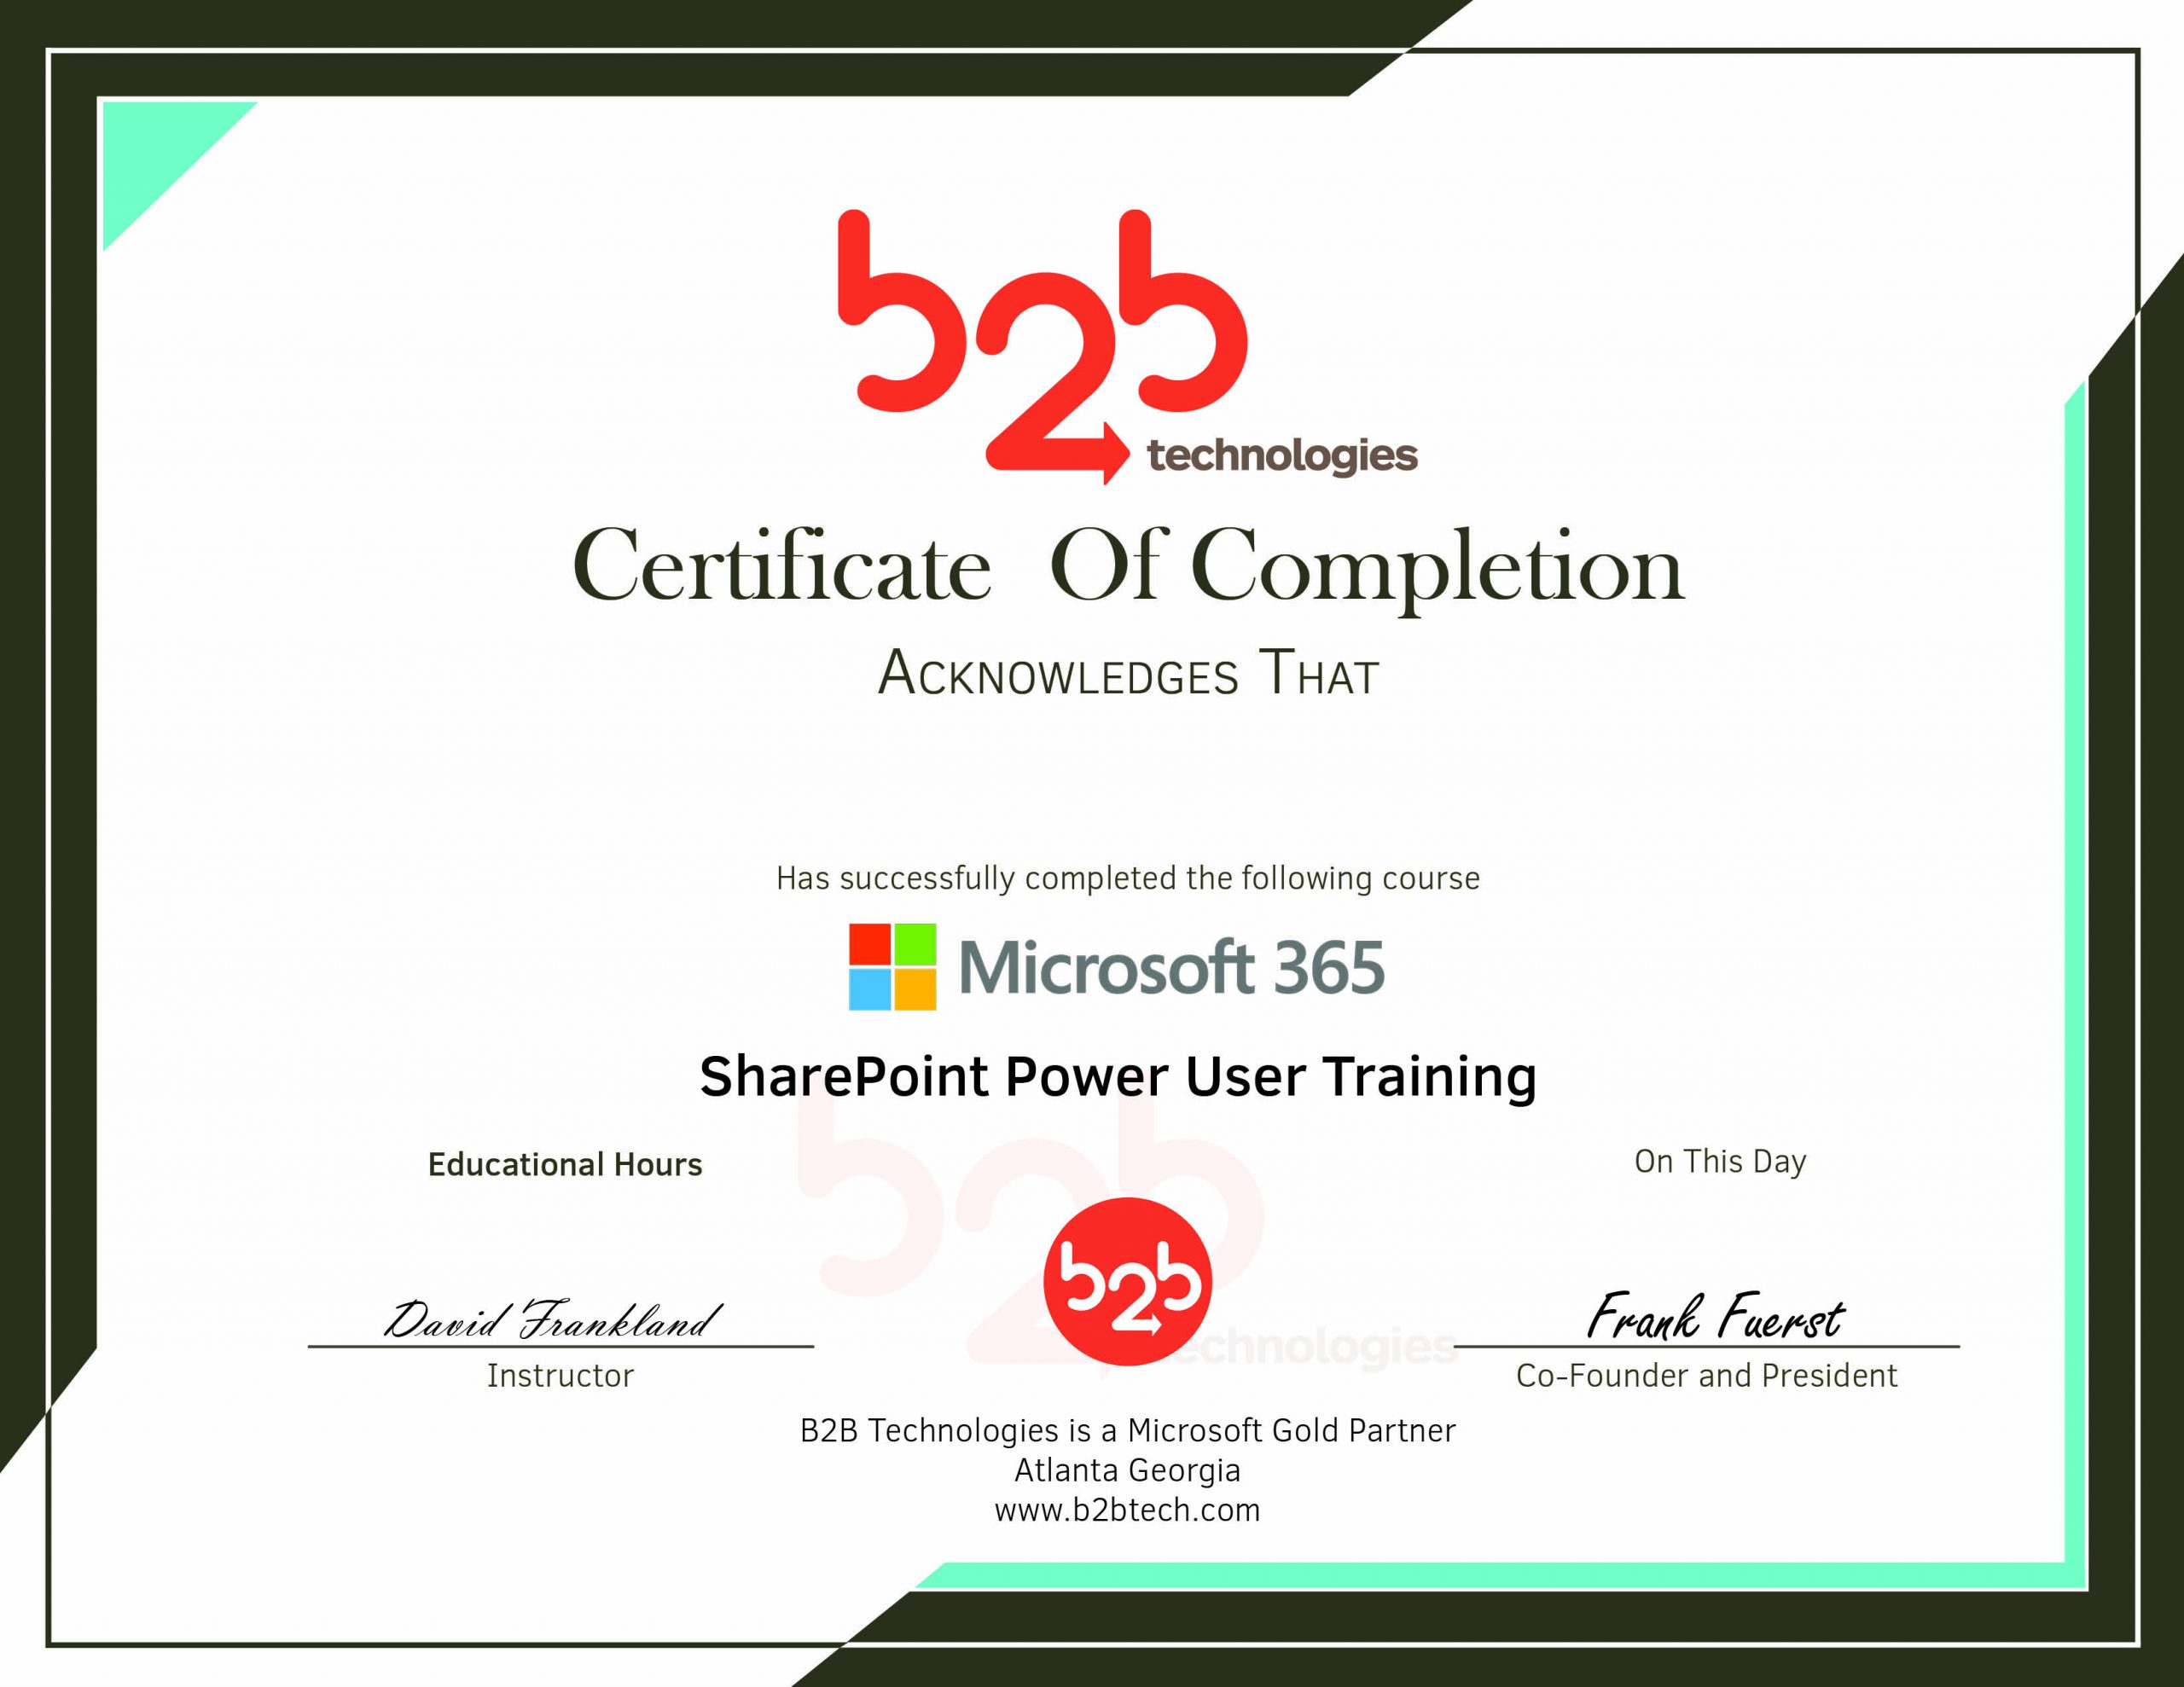 Protected: Certificate for SharePoint Power User Training